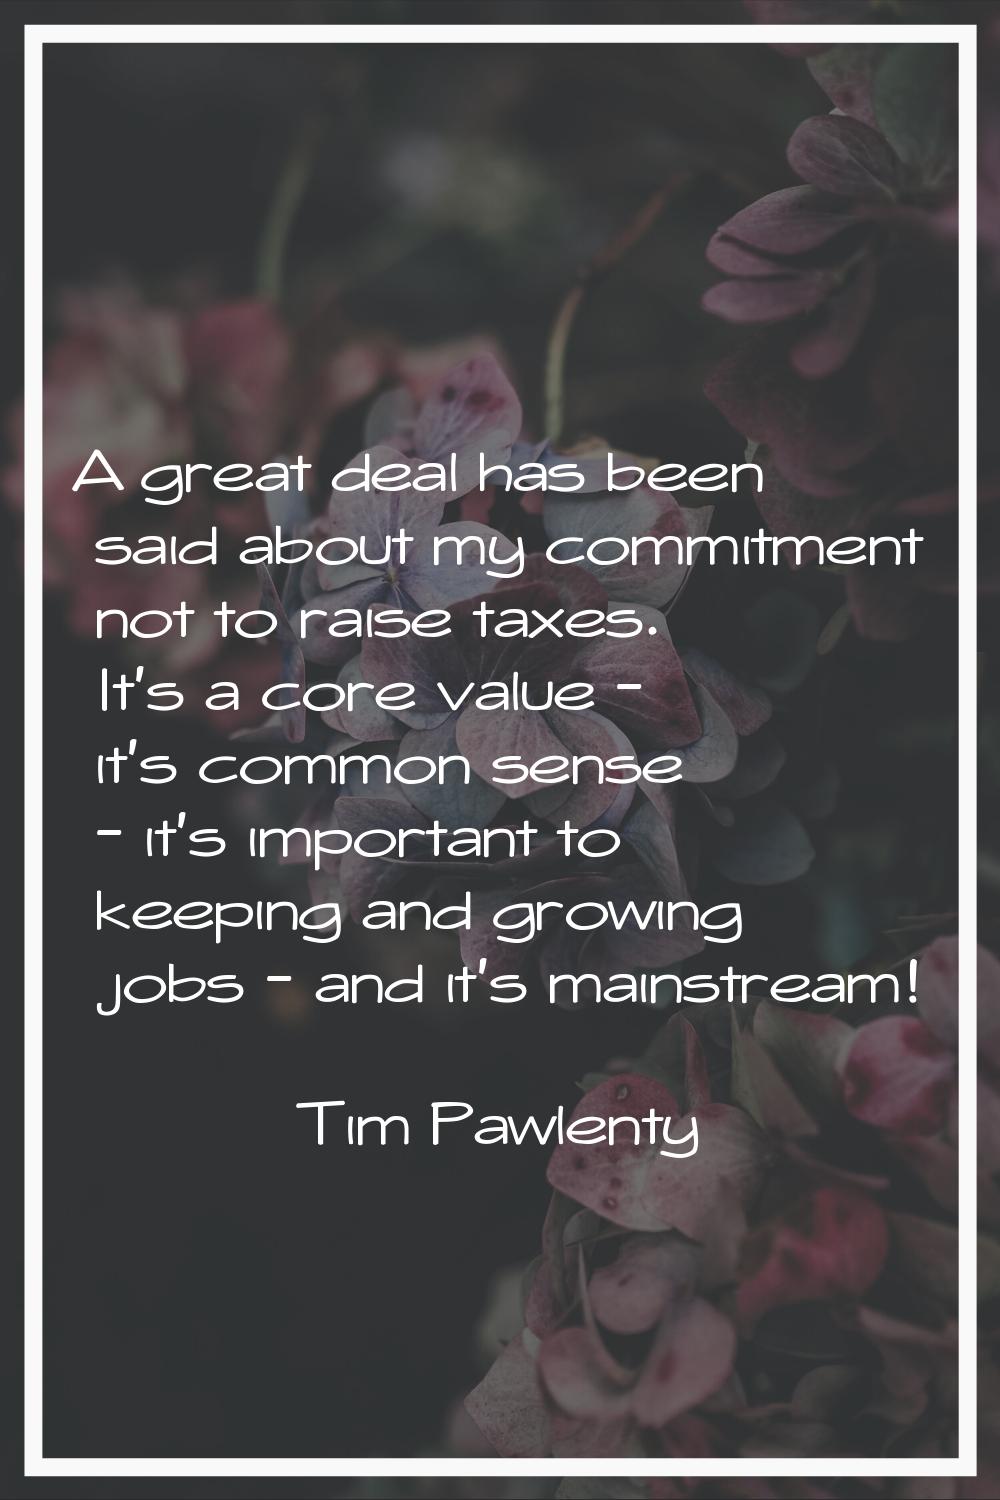 A great deal has been said about my commitment not to raise taxes. It's a core value - it's common 